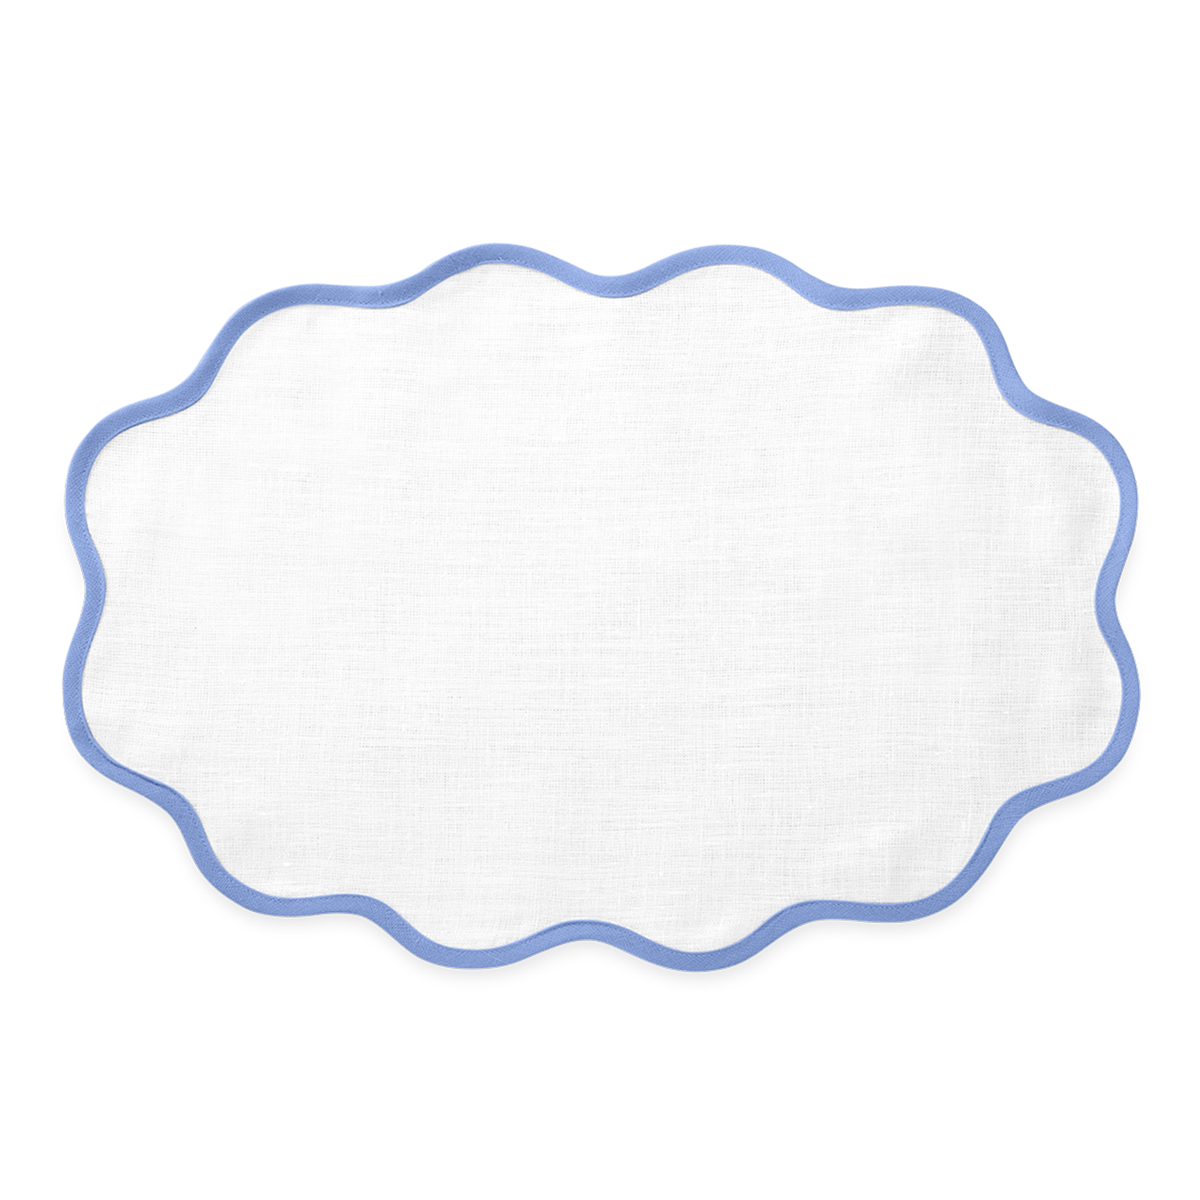 Oval Placemat of Matouk Scallop Edge Table Linens in Color Sky Blue